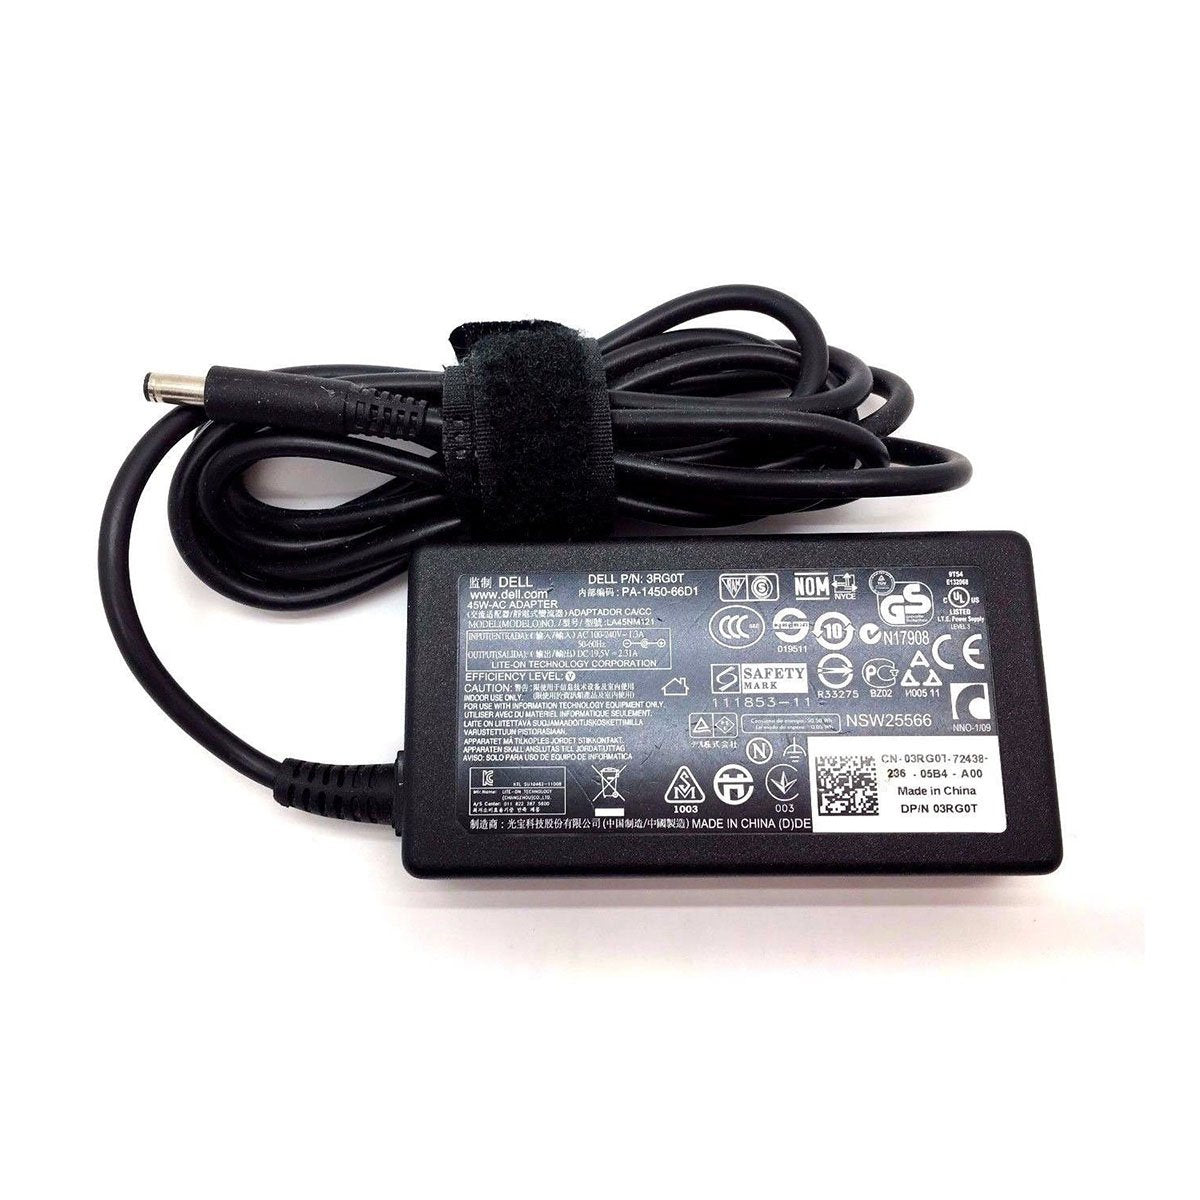 Dell Inspiron 15 5575 Original 45W Laptop Charger Adapter With Power 19.5V 4.5mm Pin